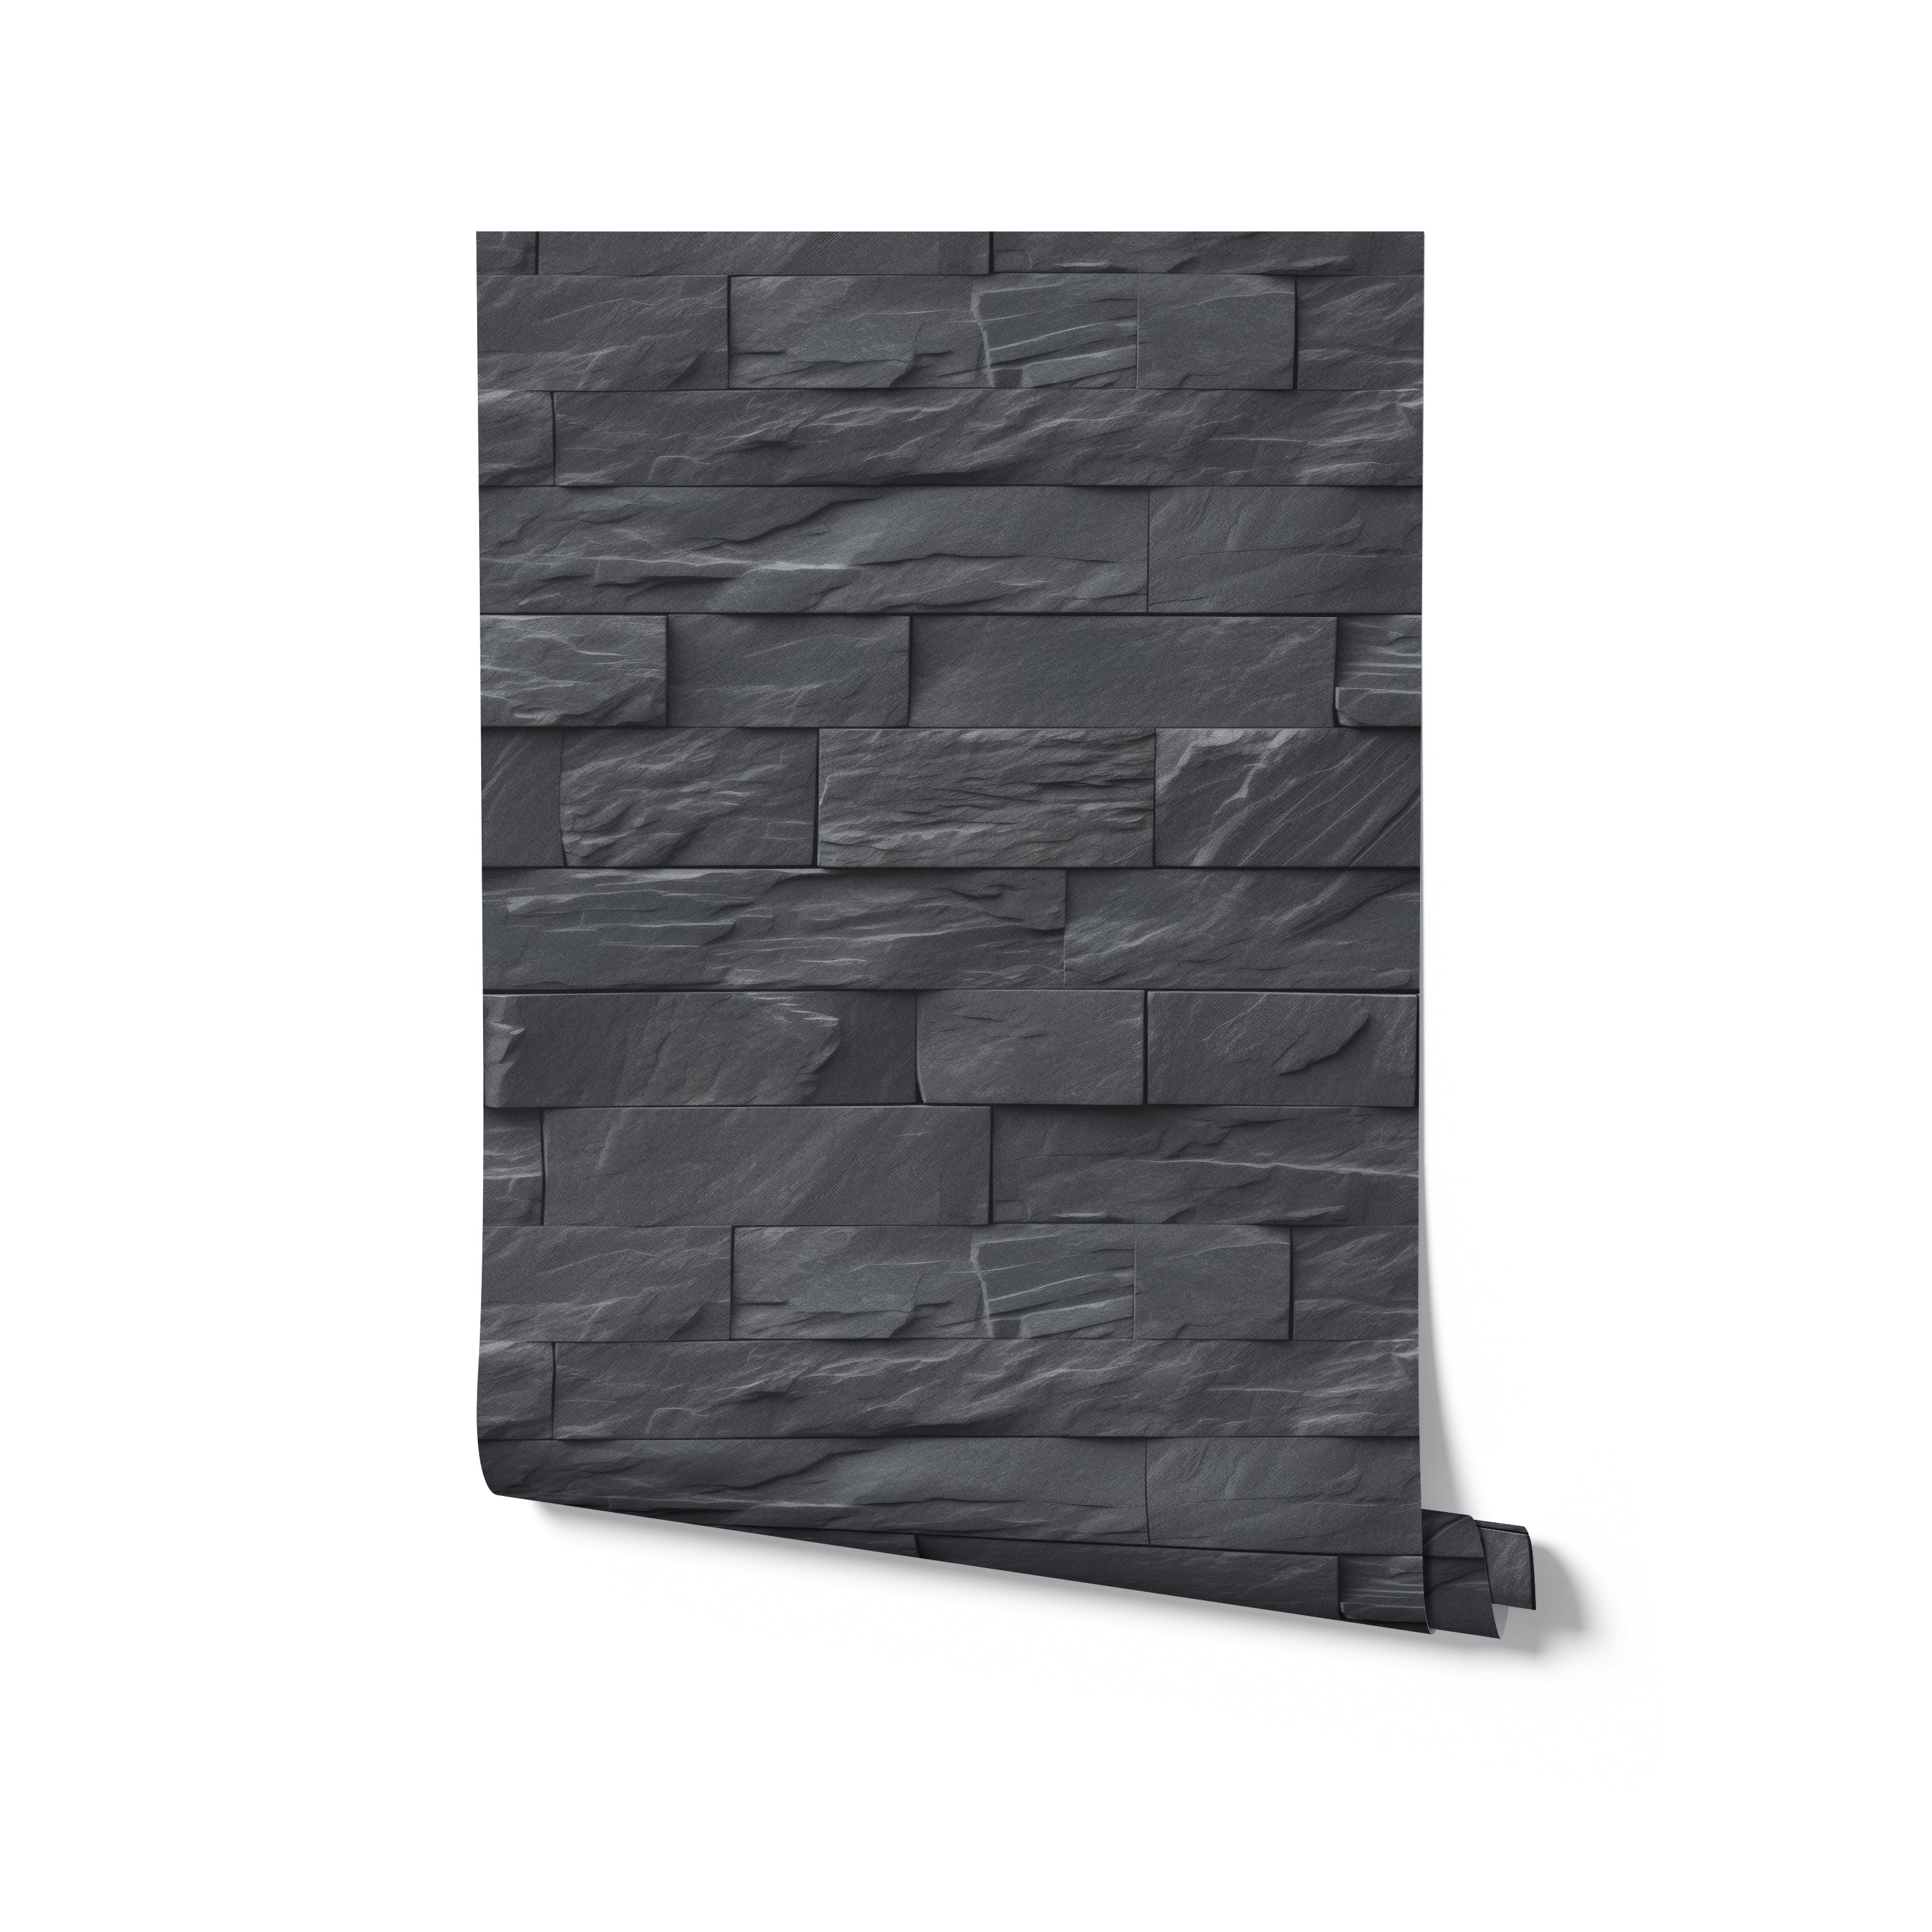 A roll of Black Brick Wallpaper with a textured, stacked stone design in dark gray. The wallpaper roll is partially unrolled, revealing its intricate and realistic stone pattern, perfect for adding a modern touch to any room.